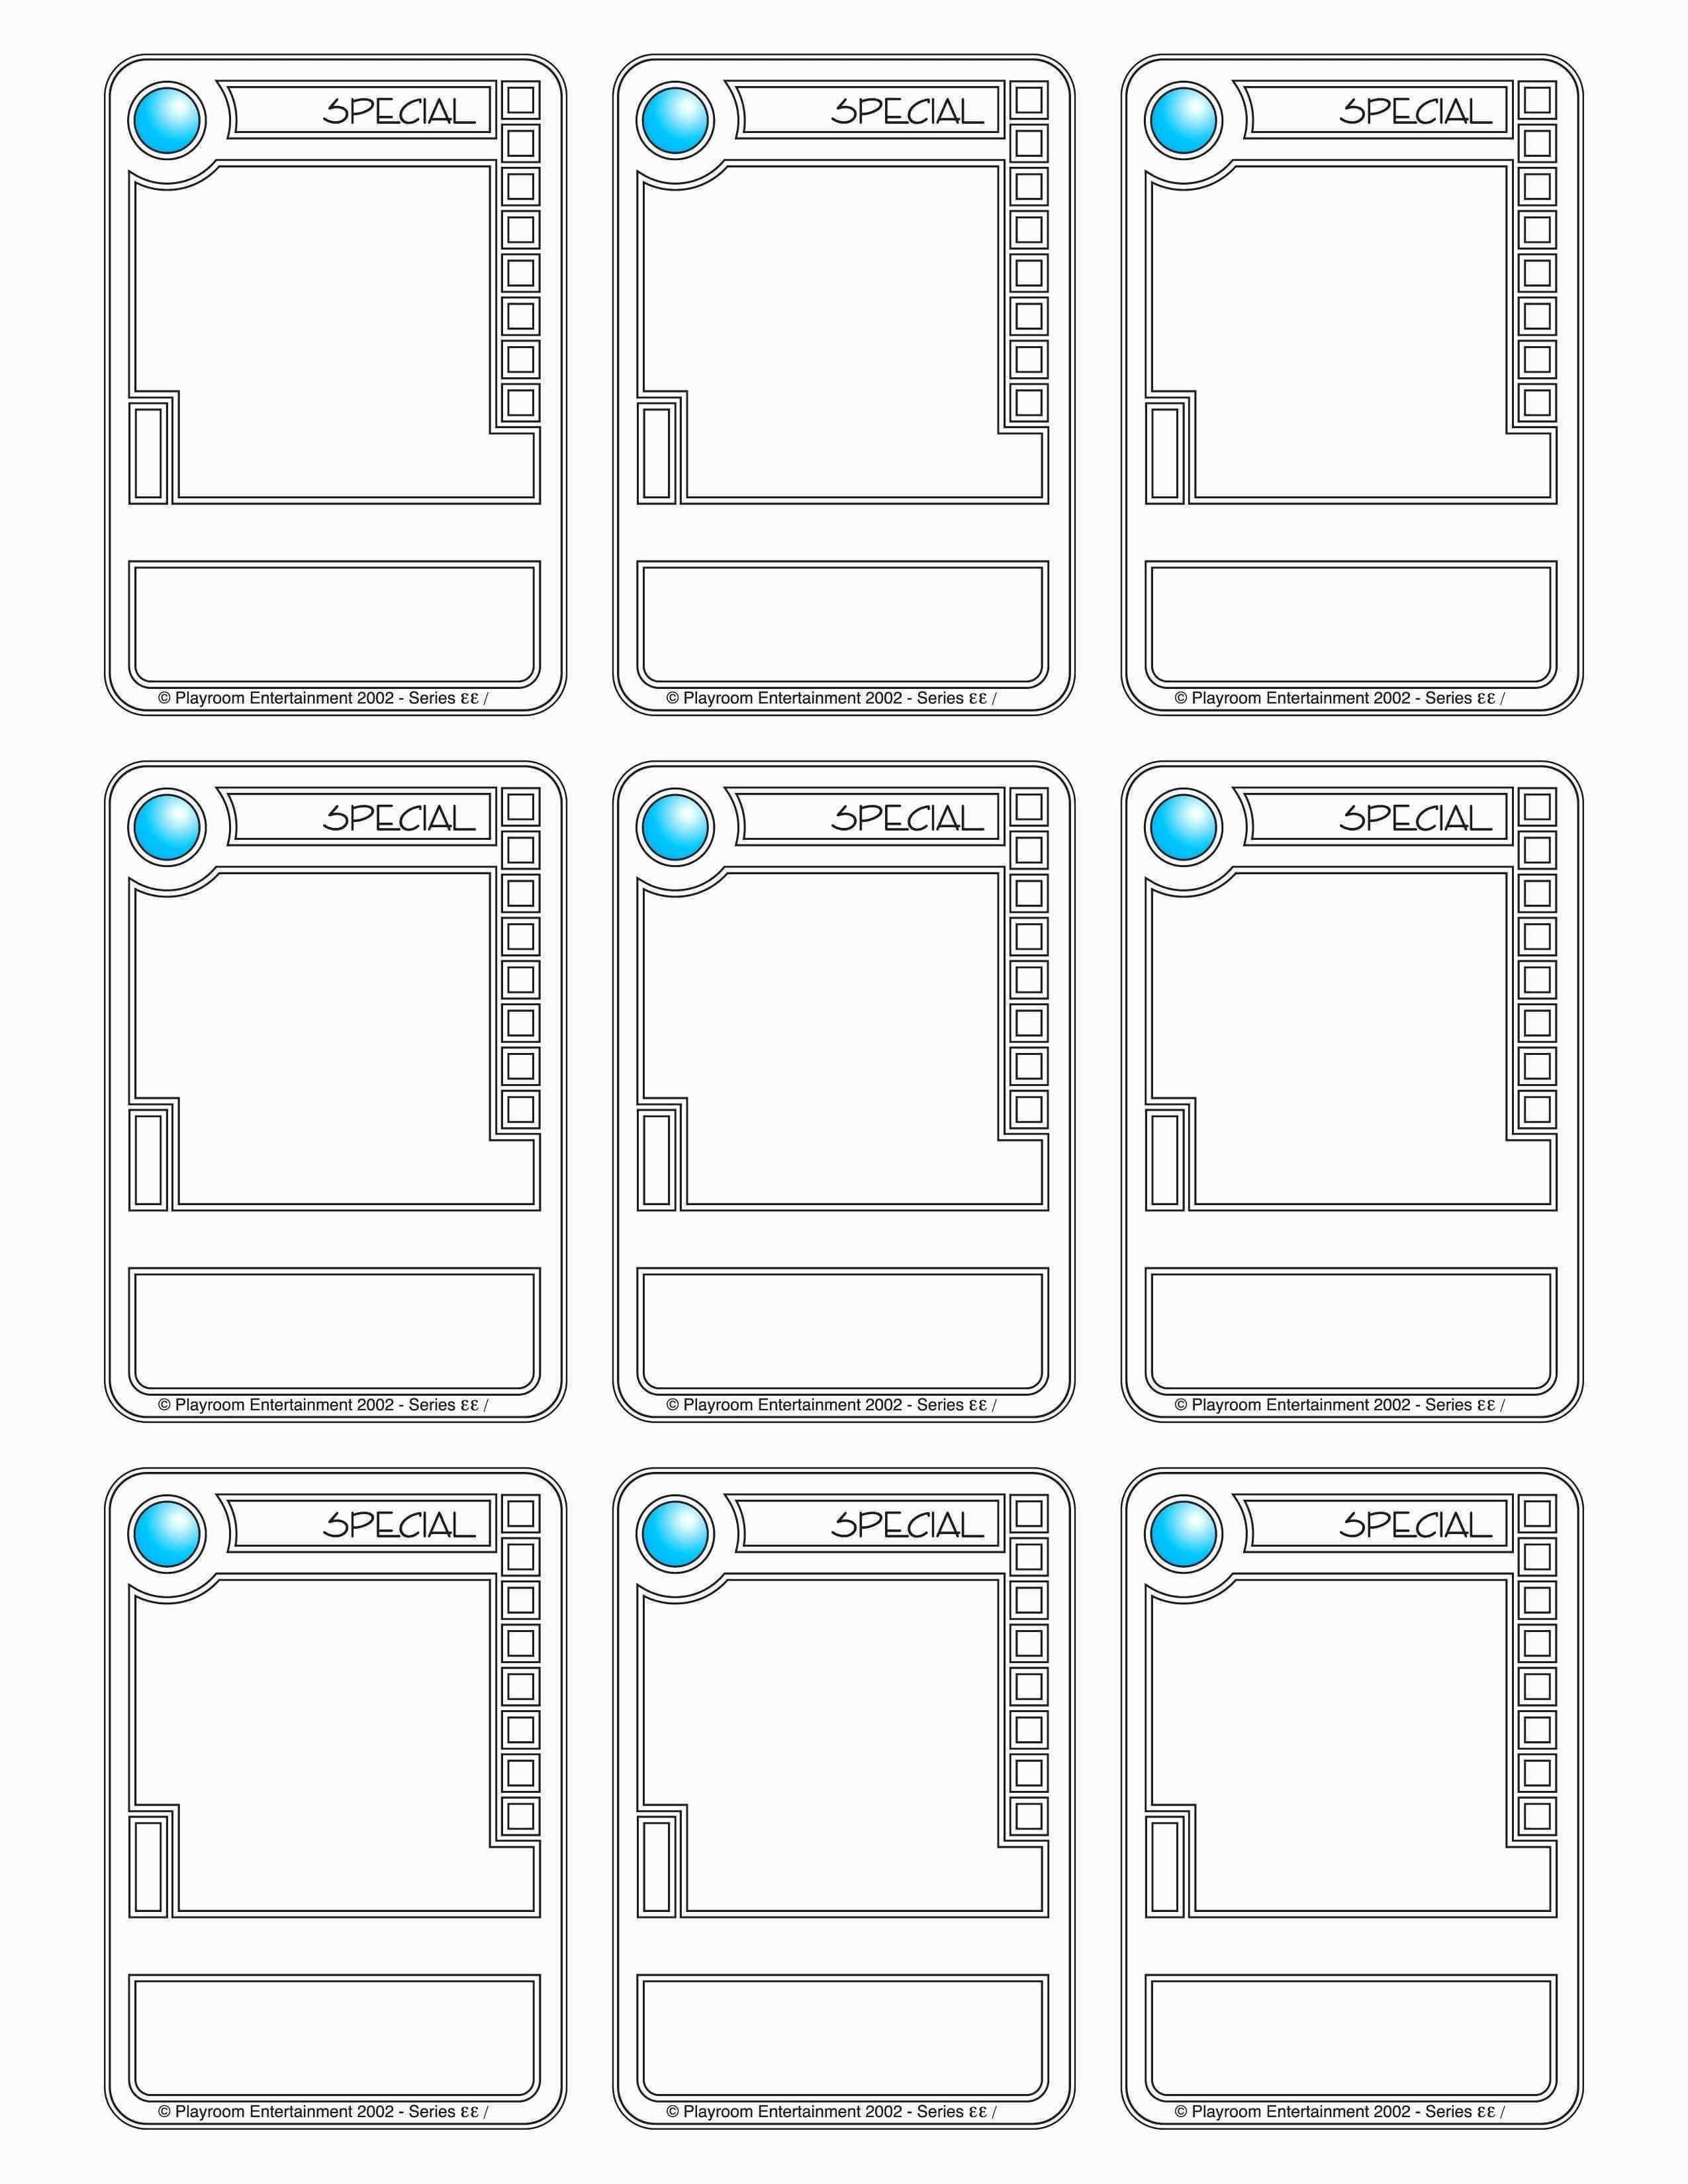 Trading Card Template (3) | Payroll Check Stubs Intended For Trading Card Template Word